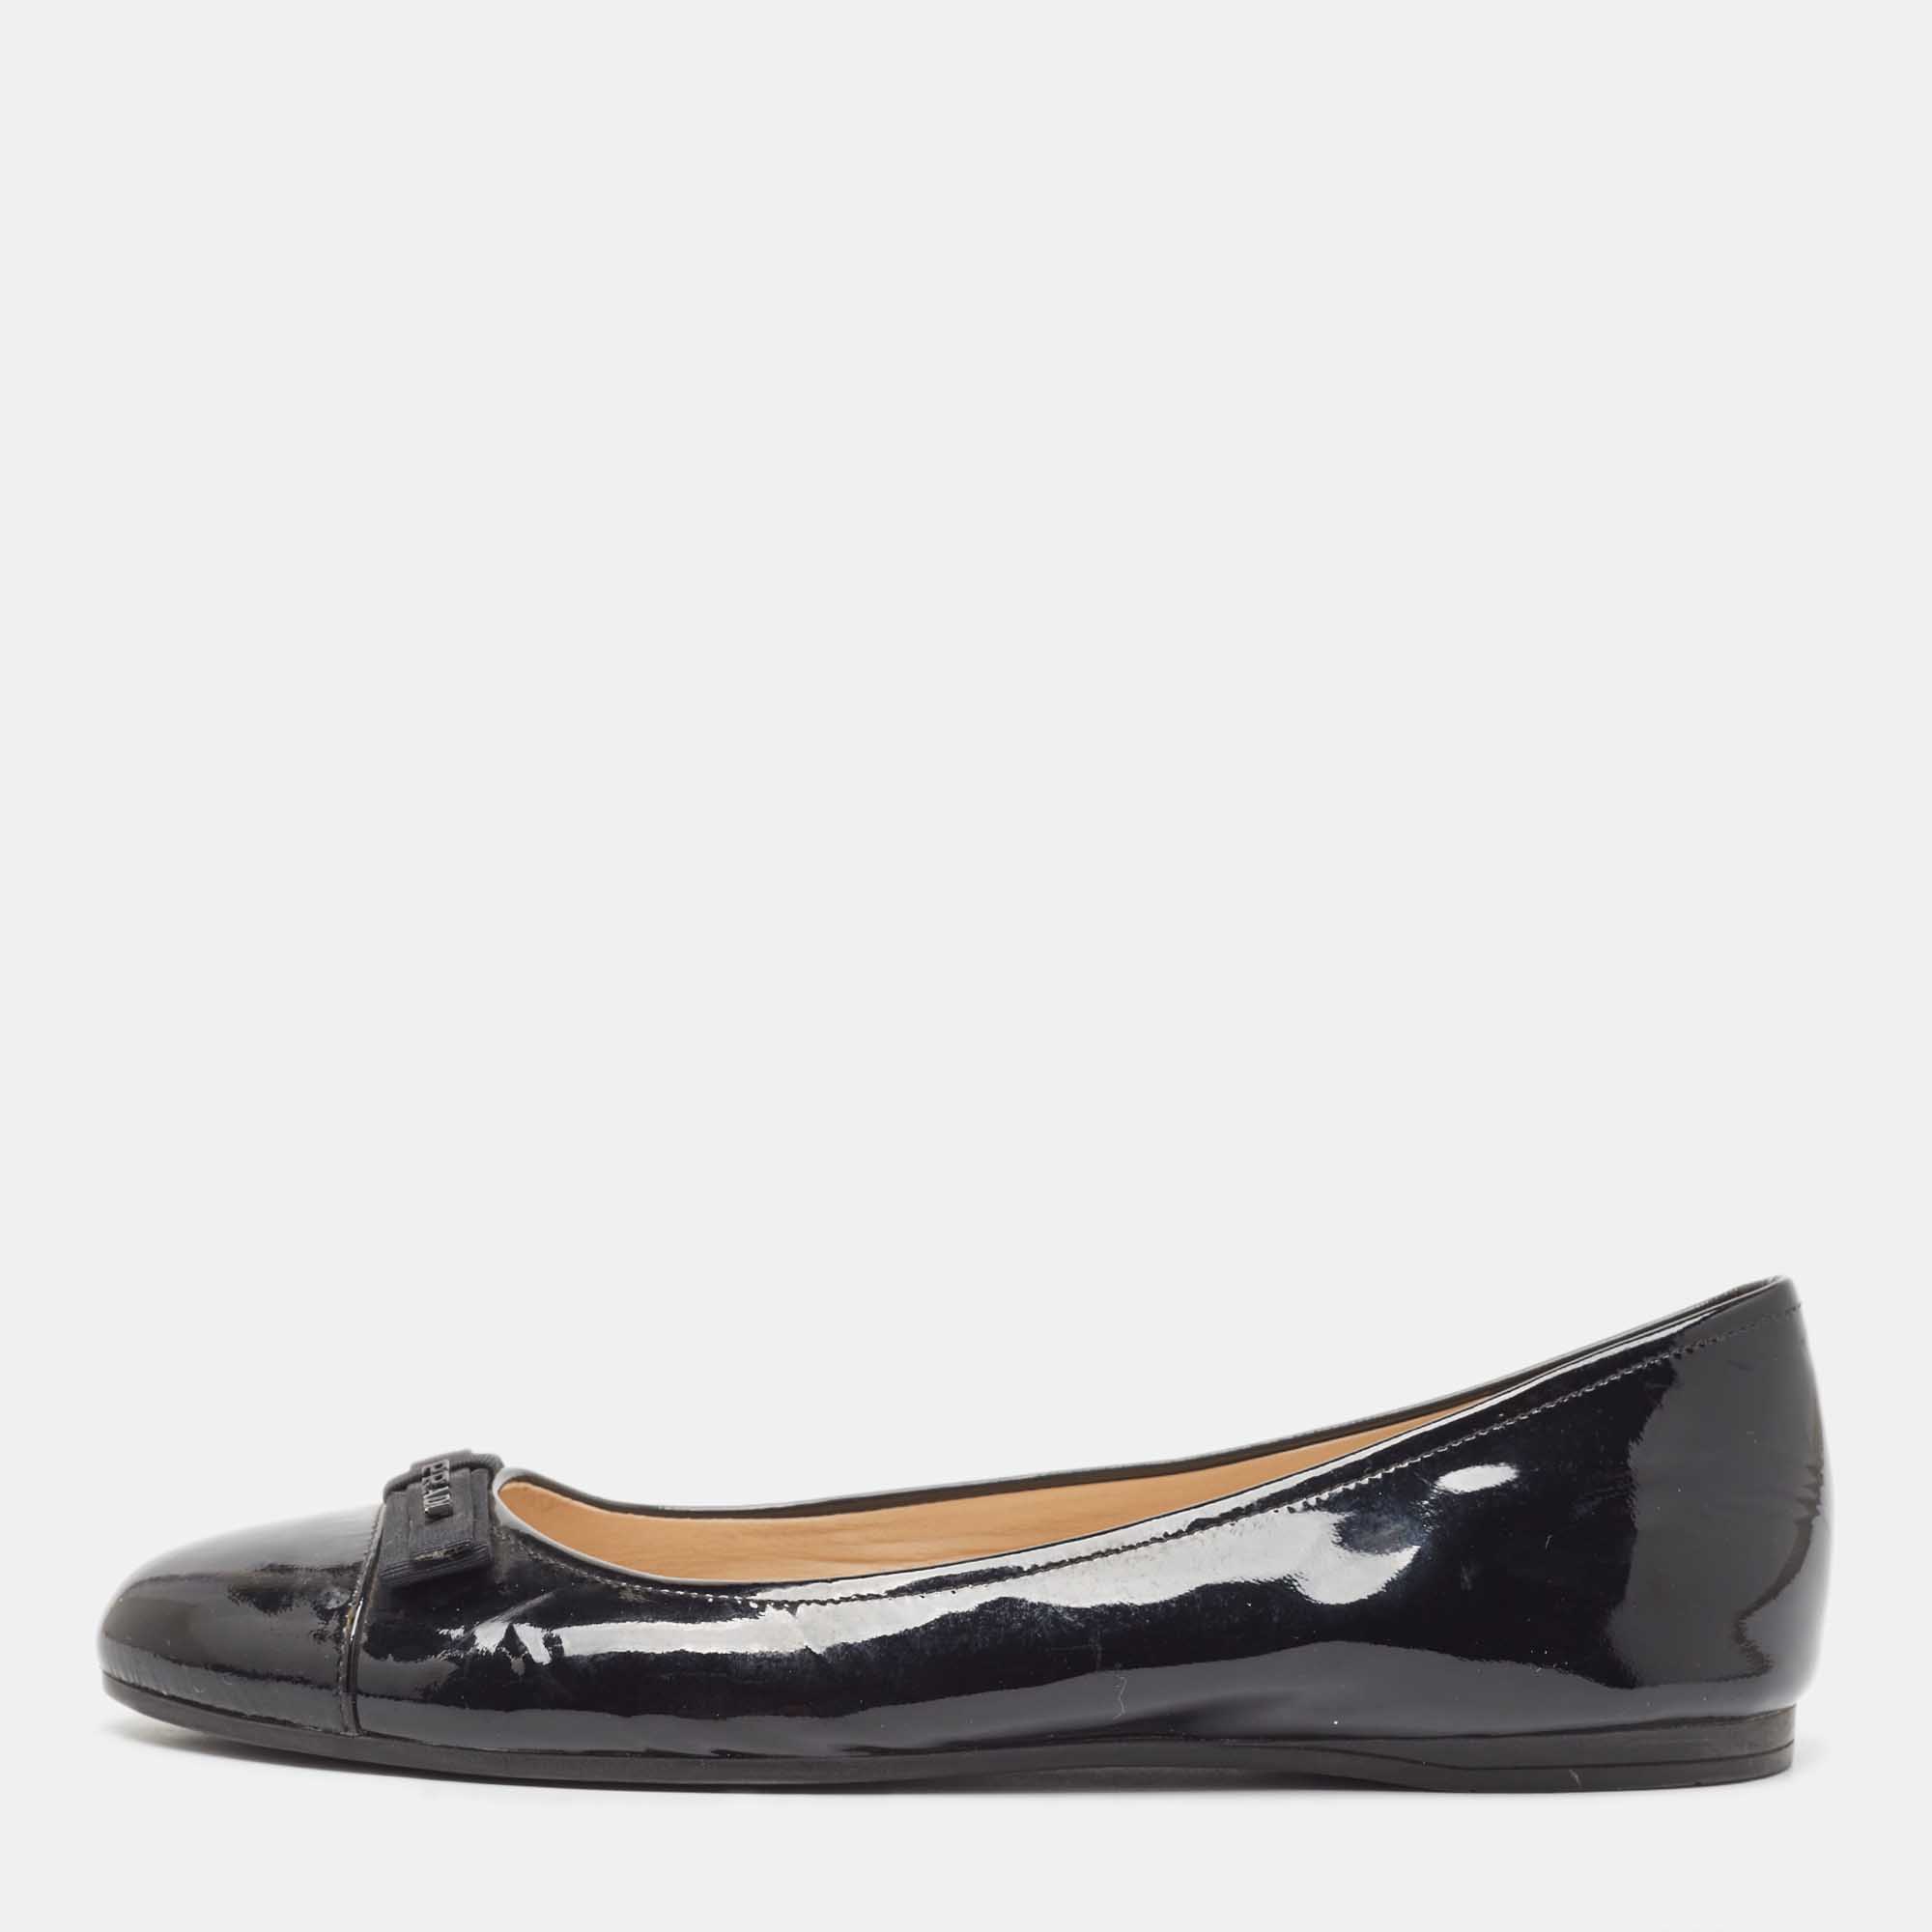 Pre-owned Prada Black Patent Bow Ballet Flats Size 37